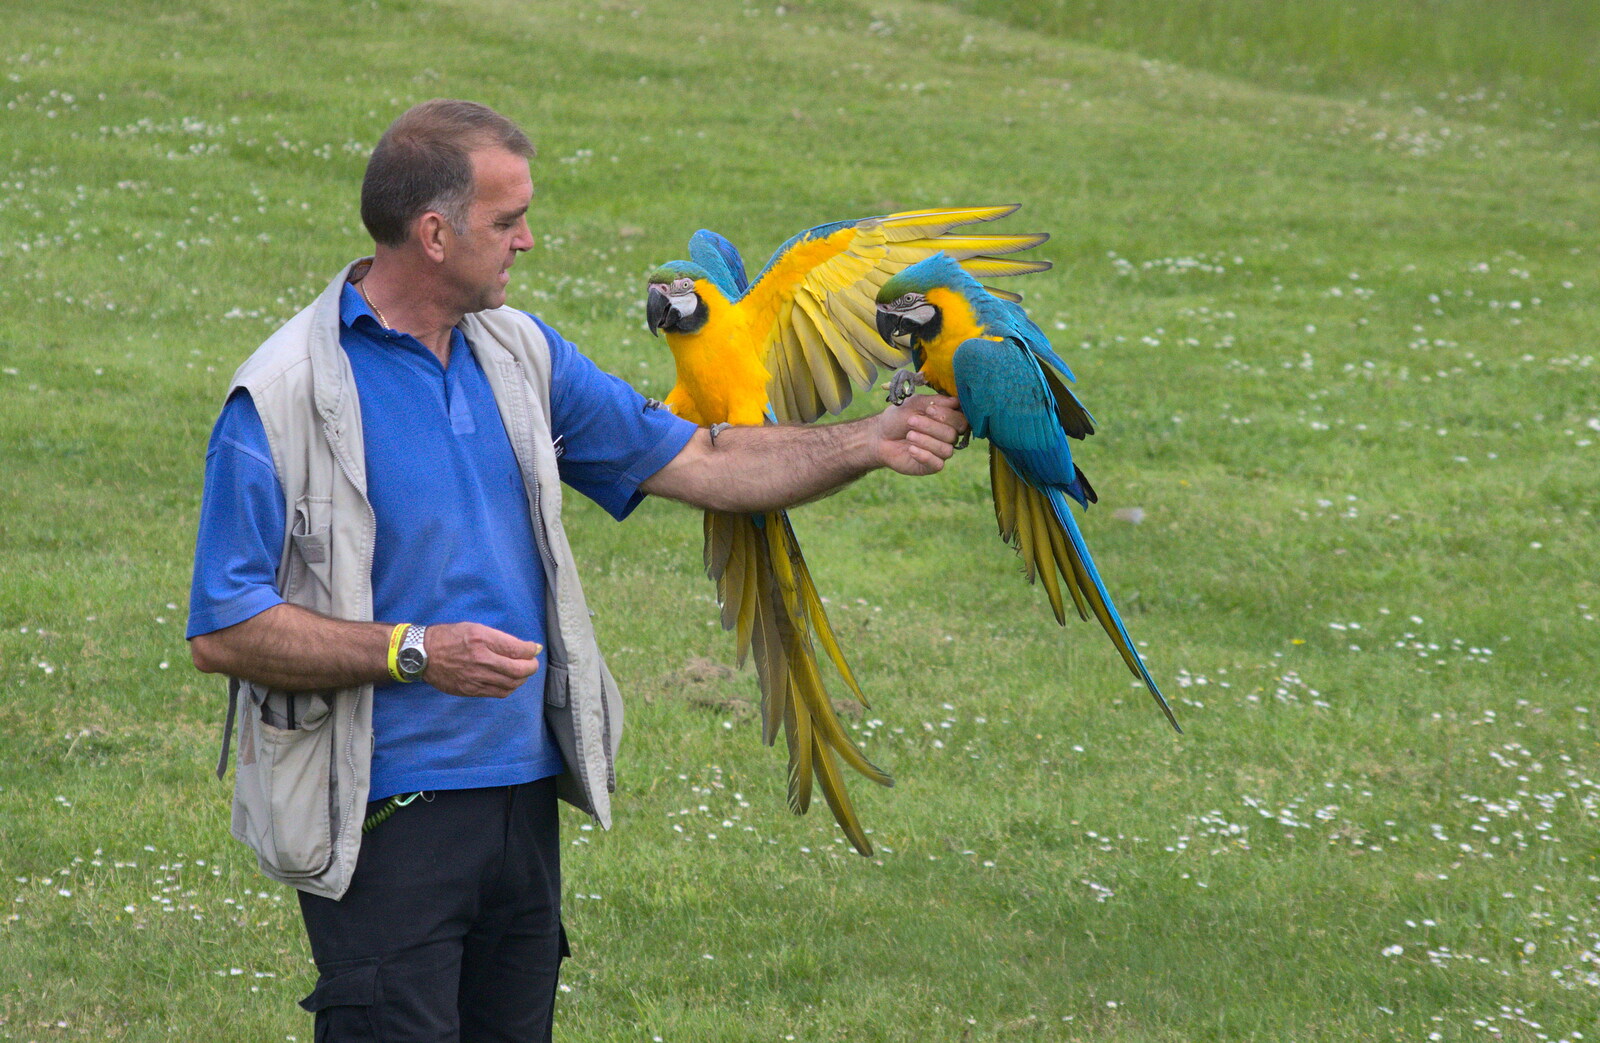 The parrots land and get a treat from A Birthday Trip to the Zoo, Banham, Norfolk - 26th May 2014